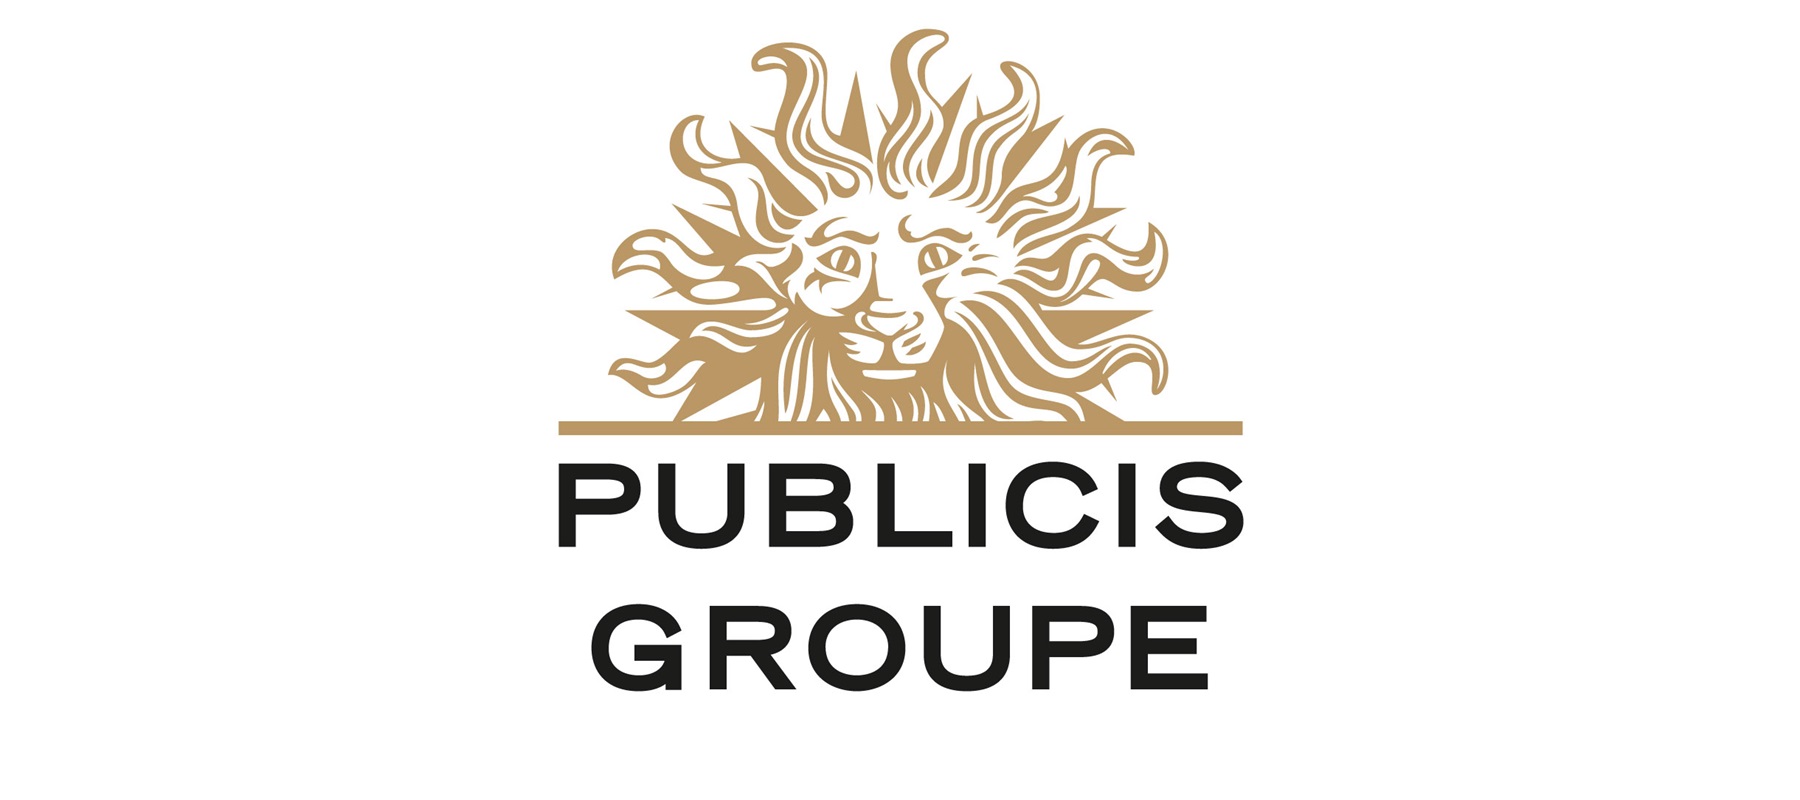 Publicis unveils AI strategy to lead group into its second century